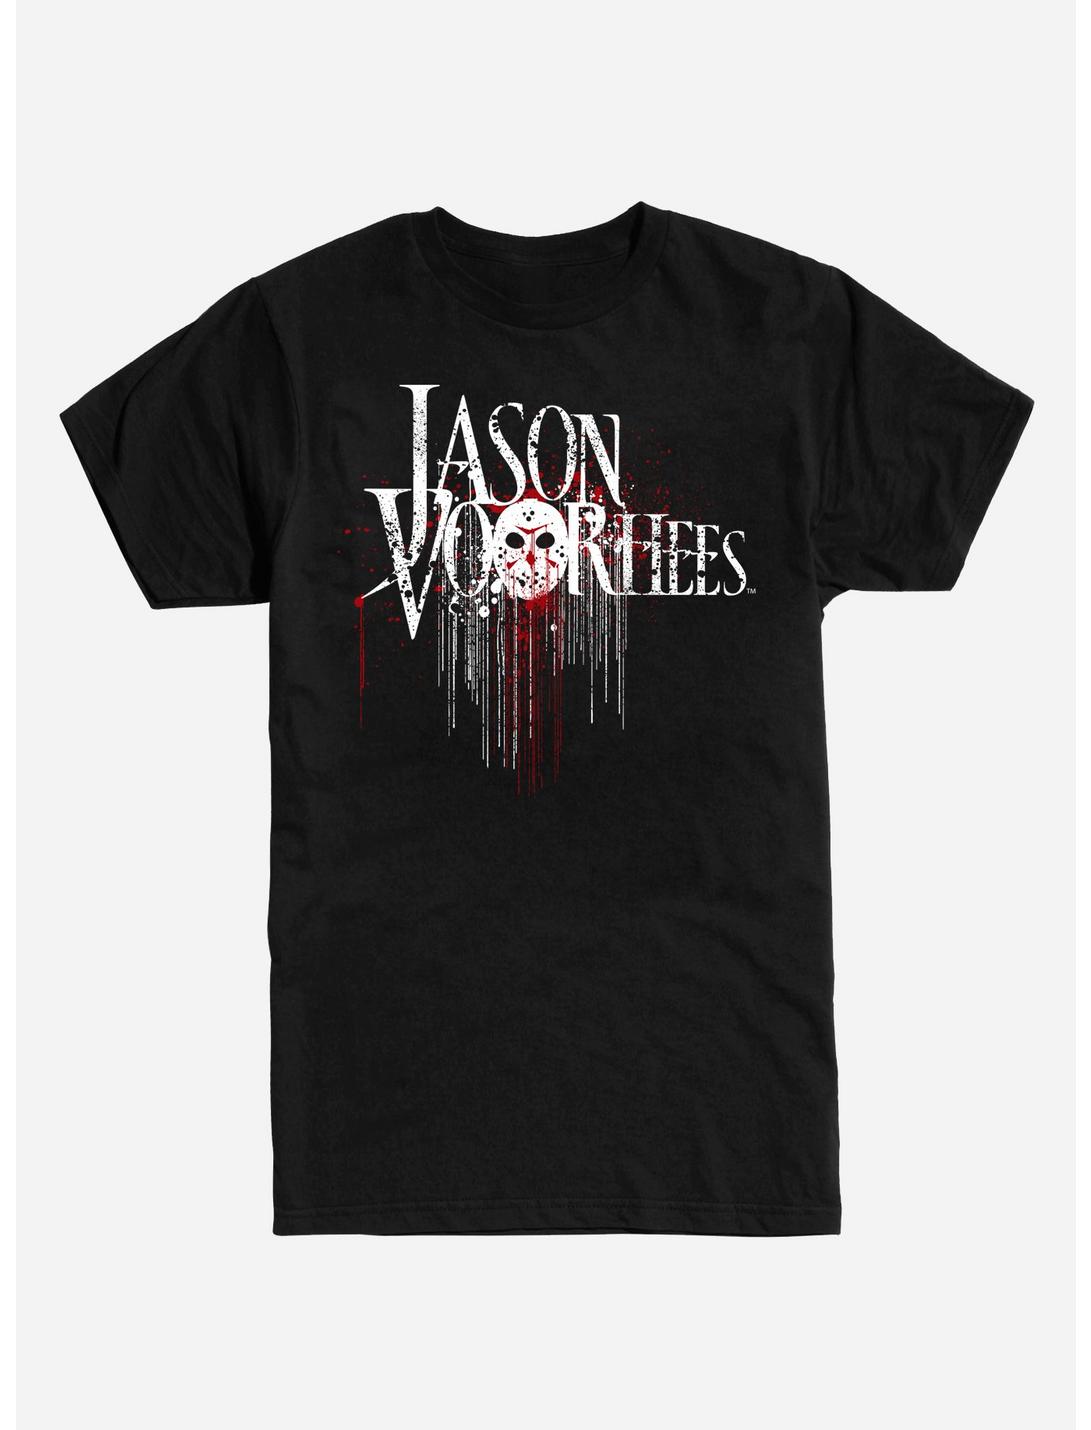 Friday the 13th Jason Voorhees Mask T-Shirt, BLACK, hi-res